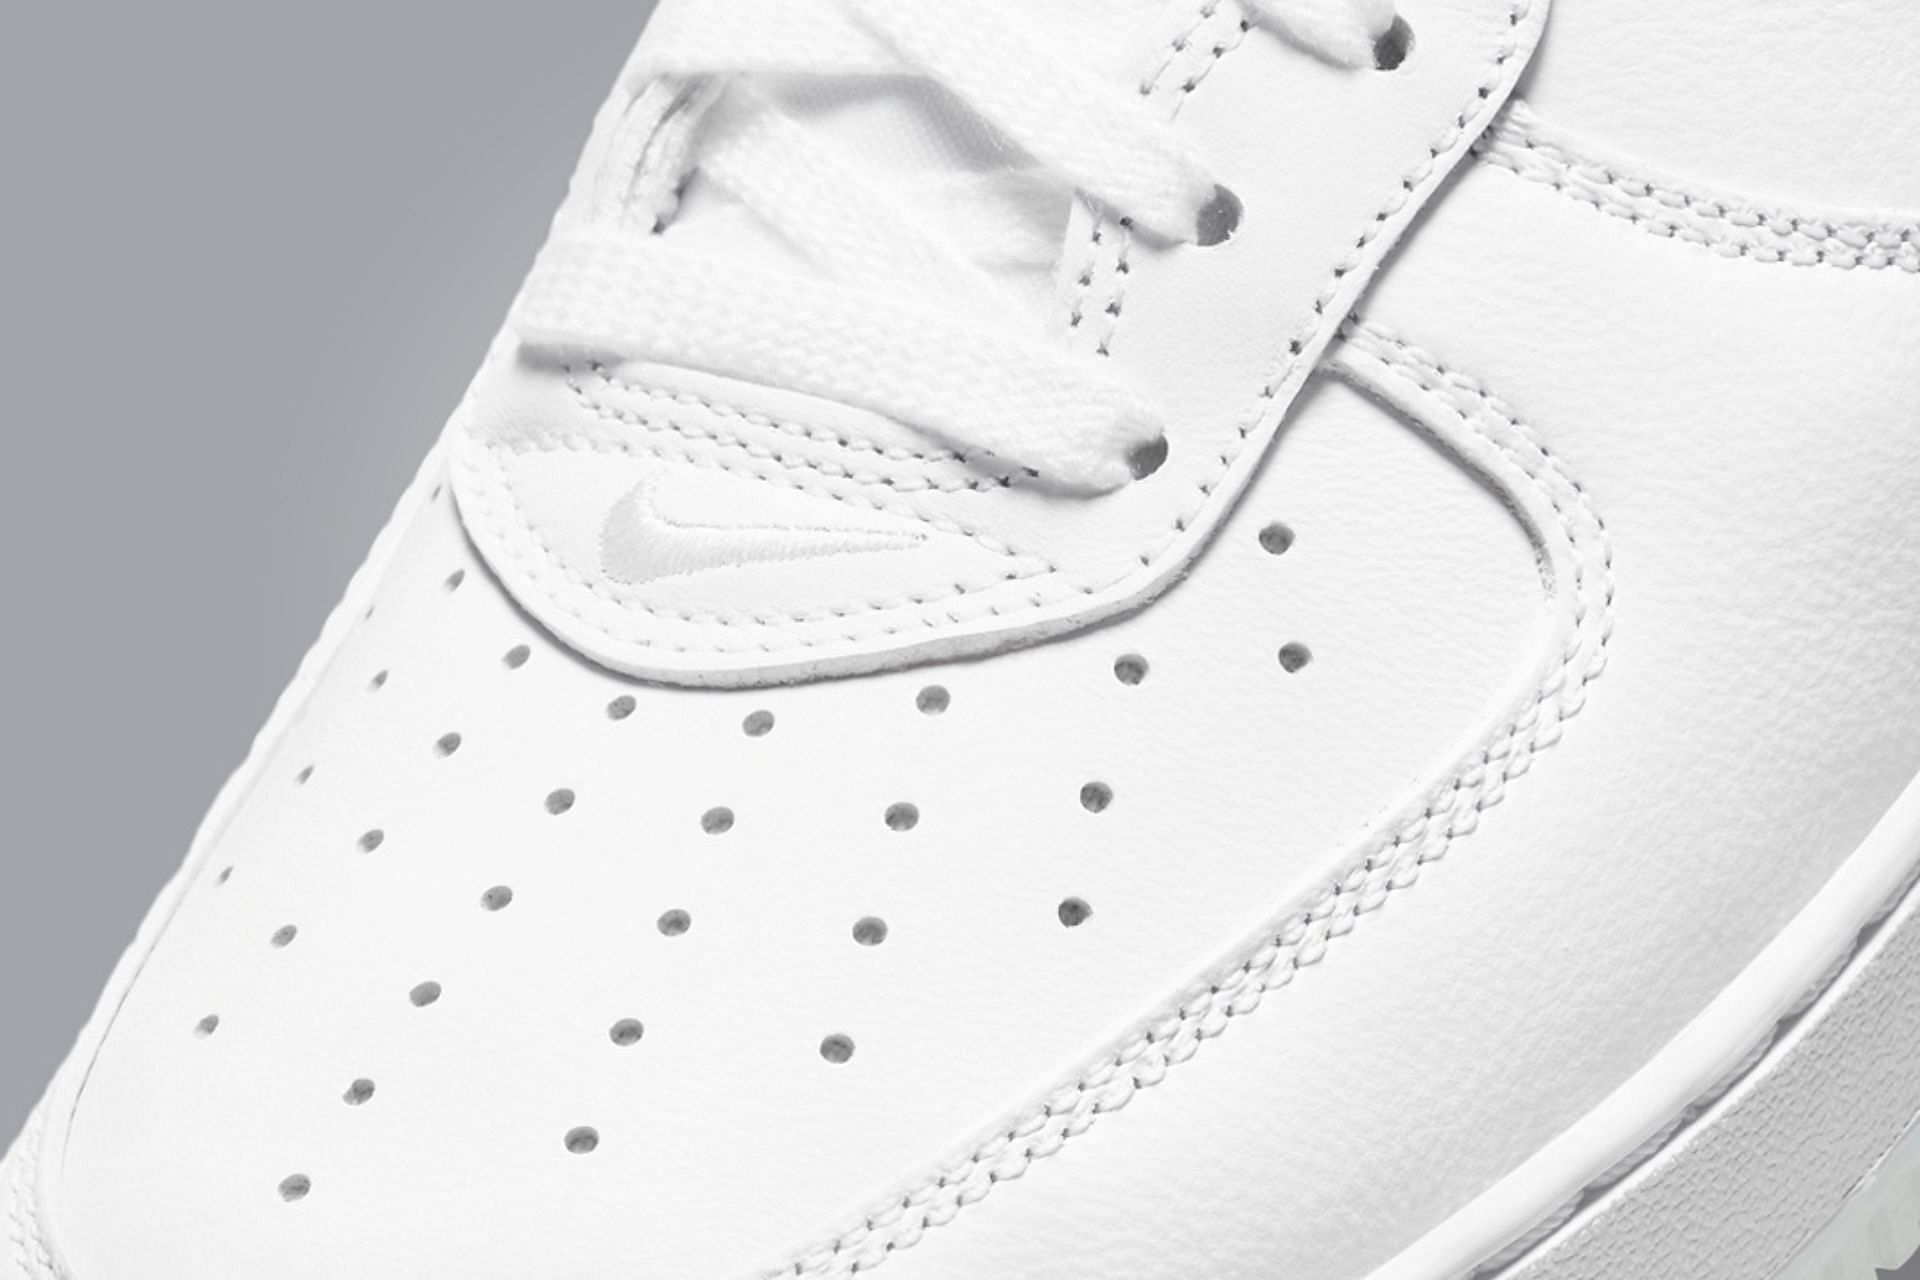 Take a closer look at the toe tops of the arriving sneakers (Image via Nike)